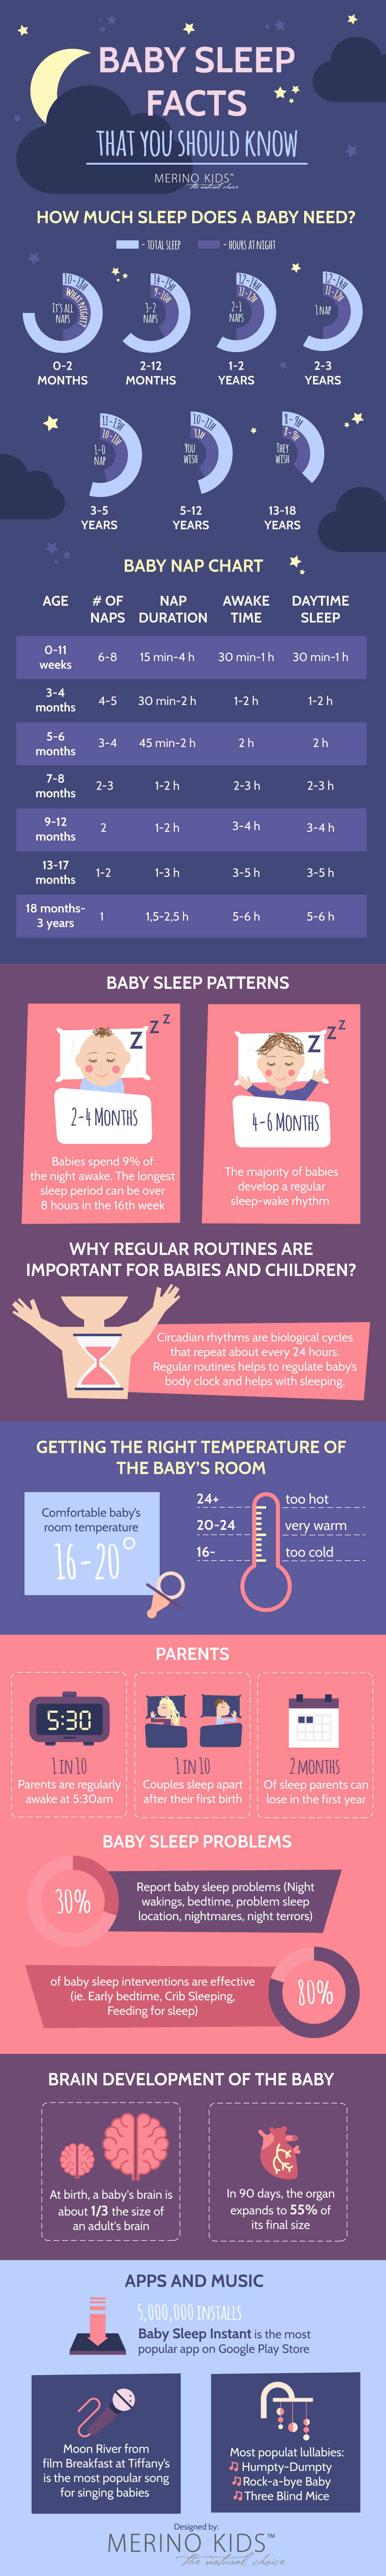 How Much Sleep Does A Baby Need?